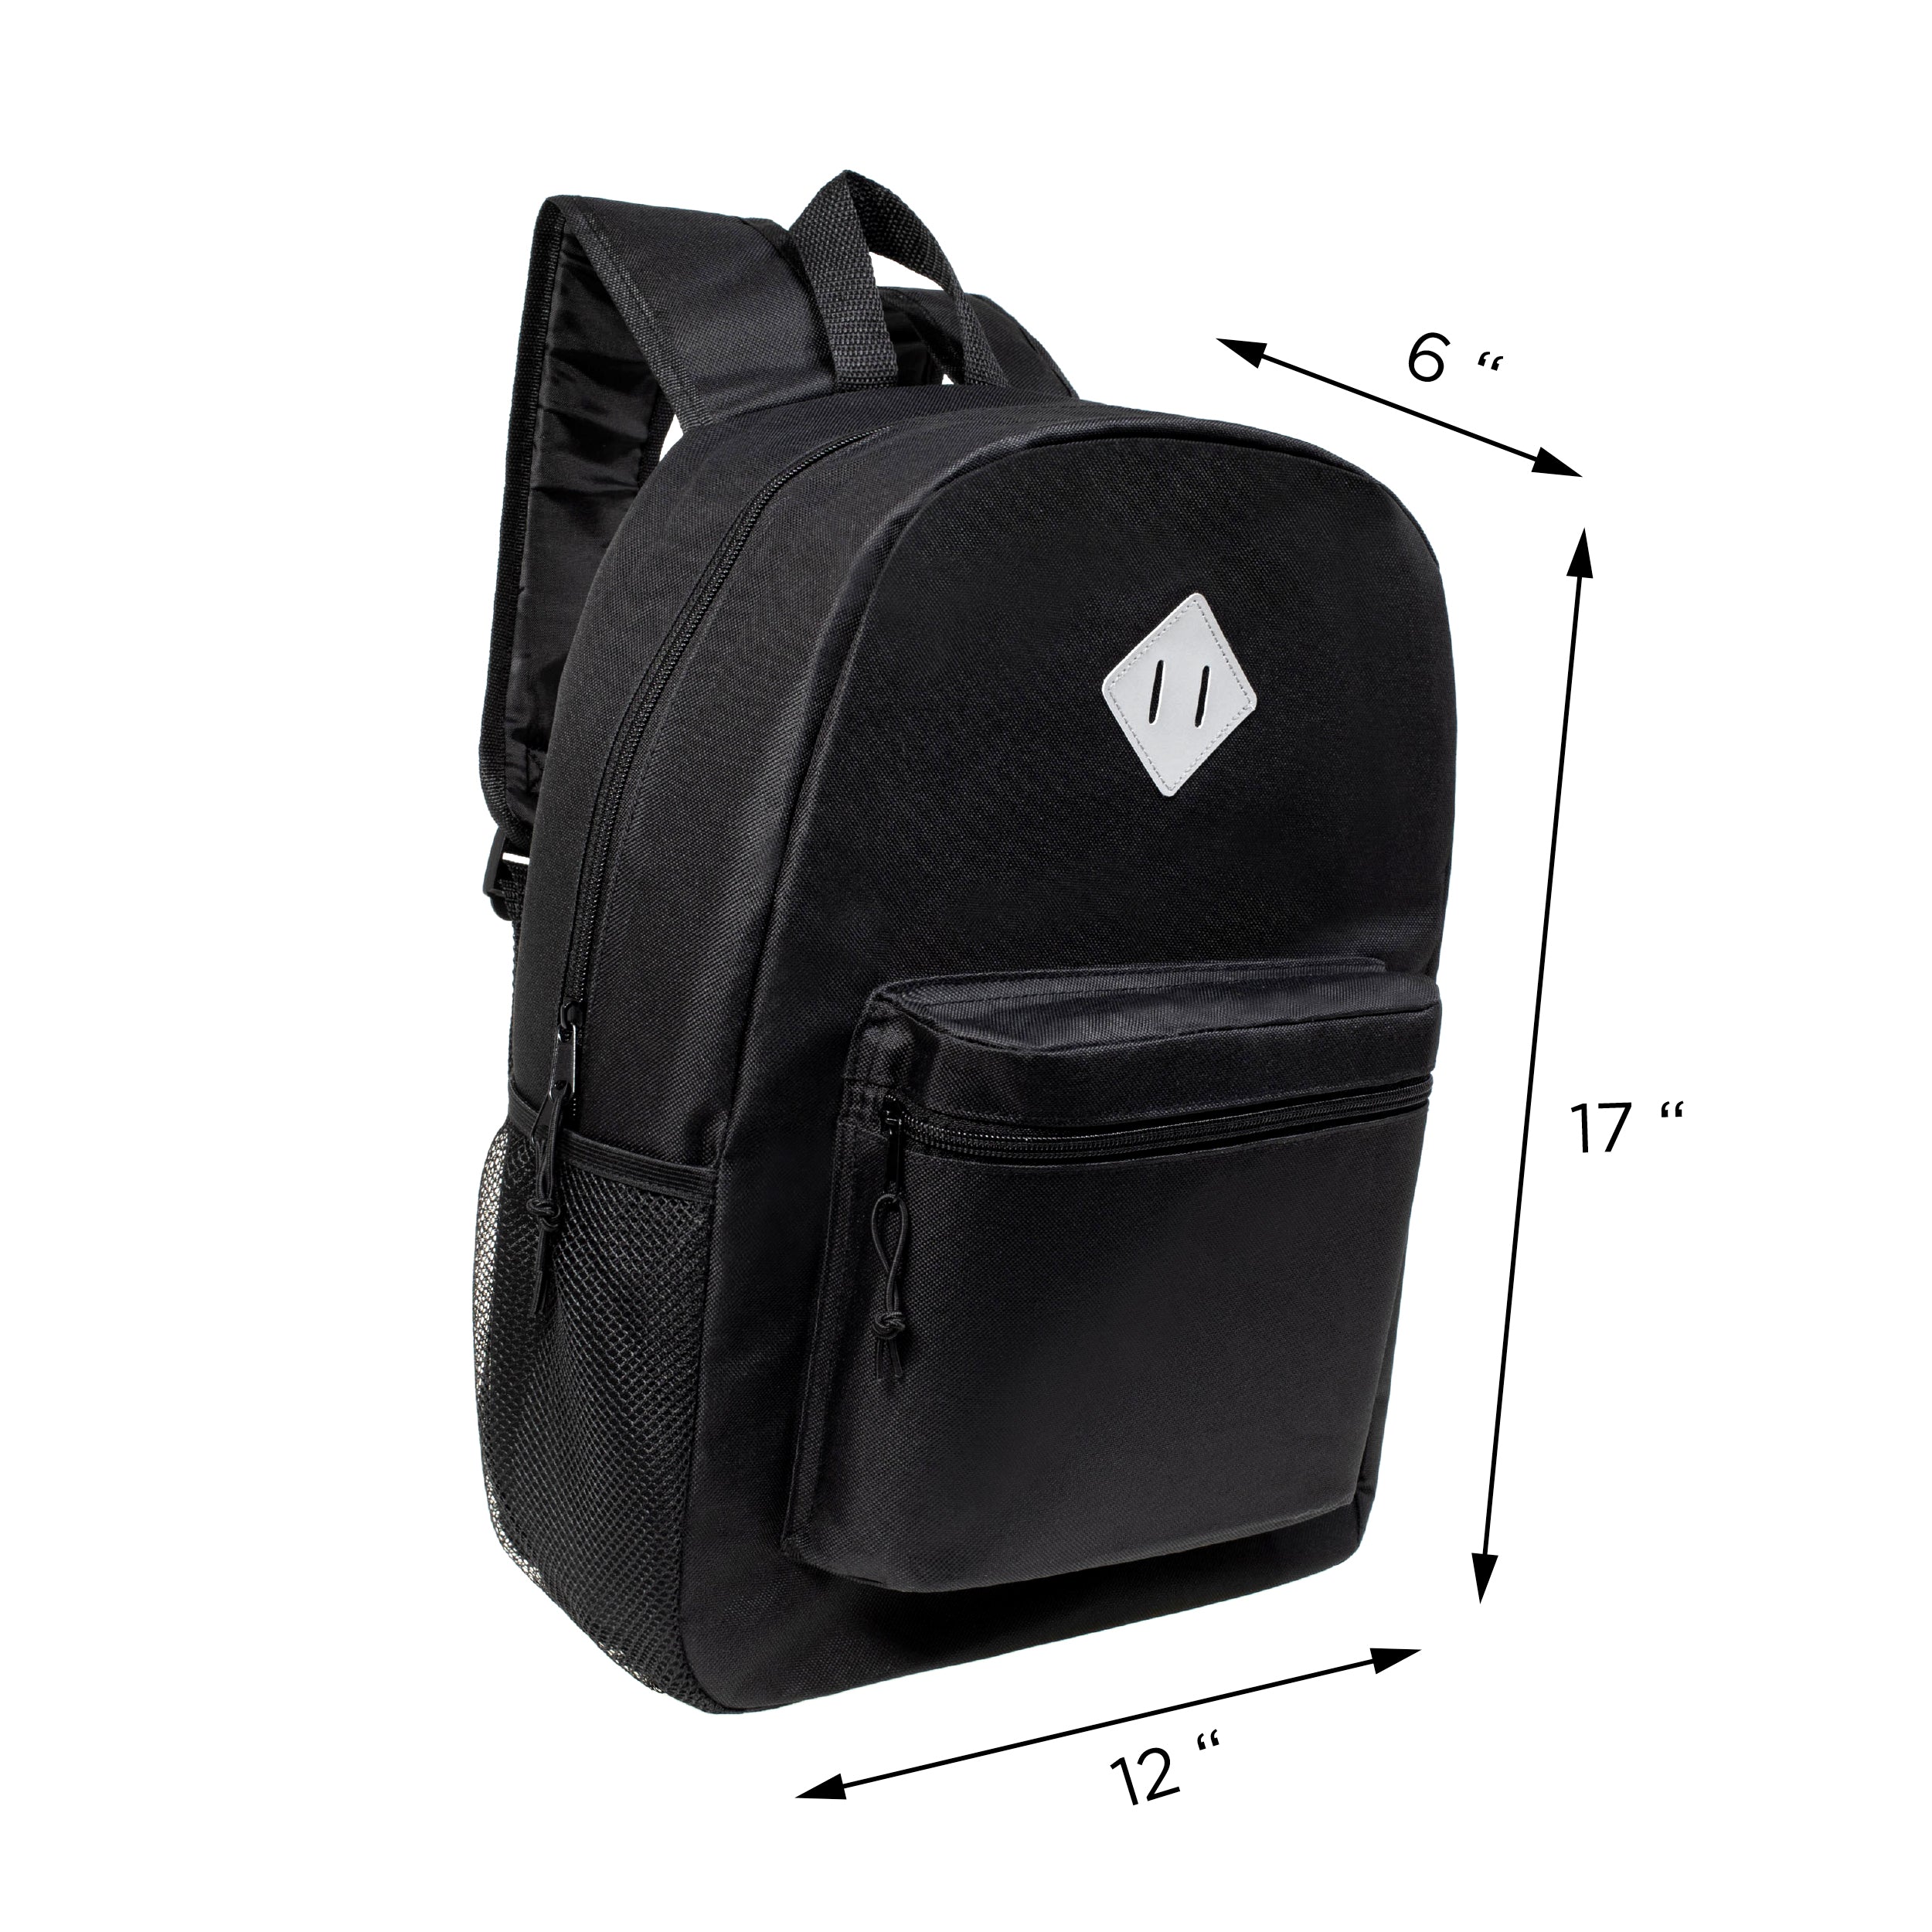 17" Wholesale Backpack in Black with Designer Inspired Patch - Bulk Case of 24